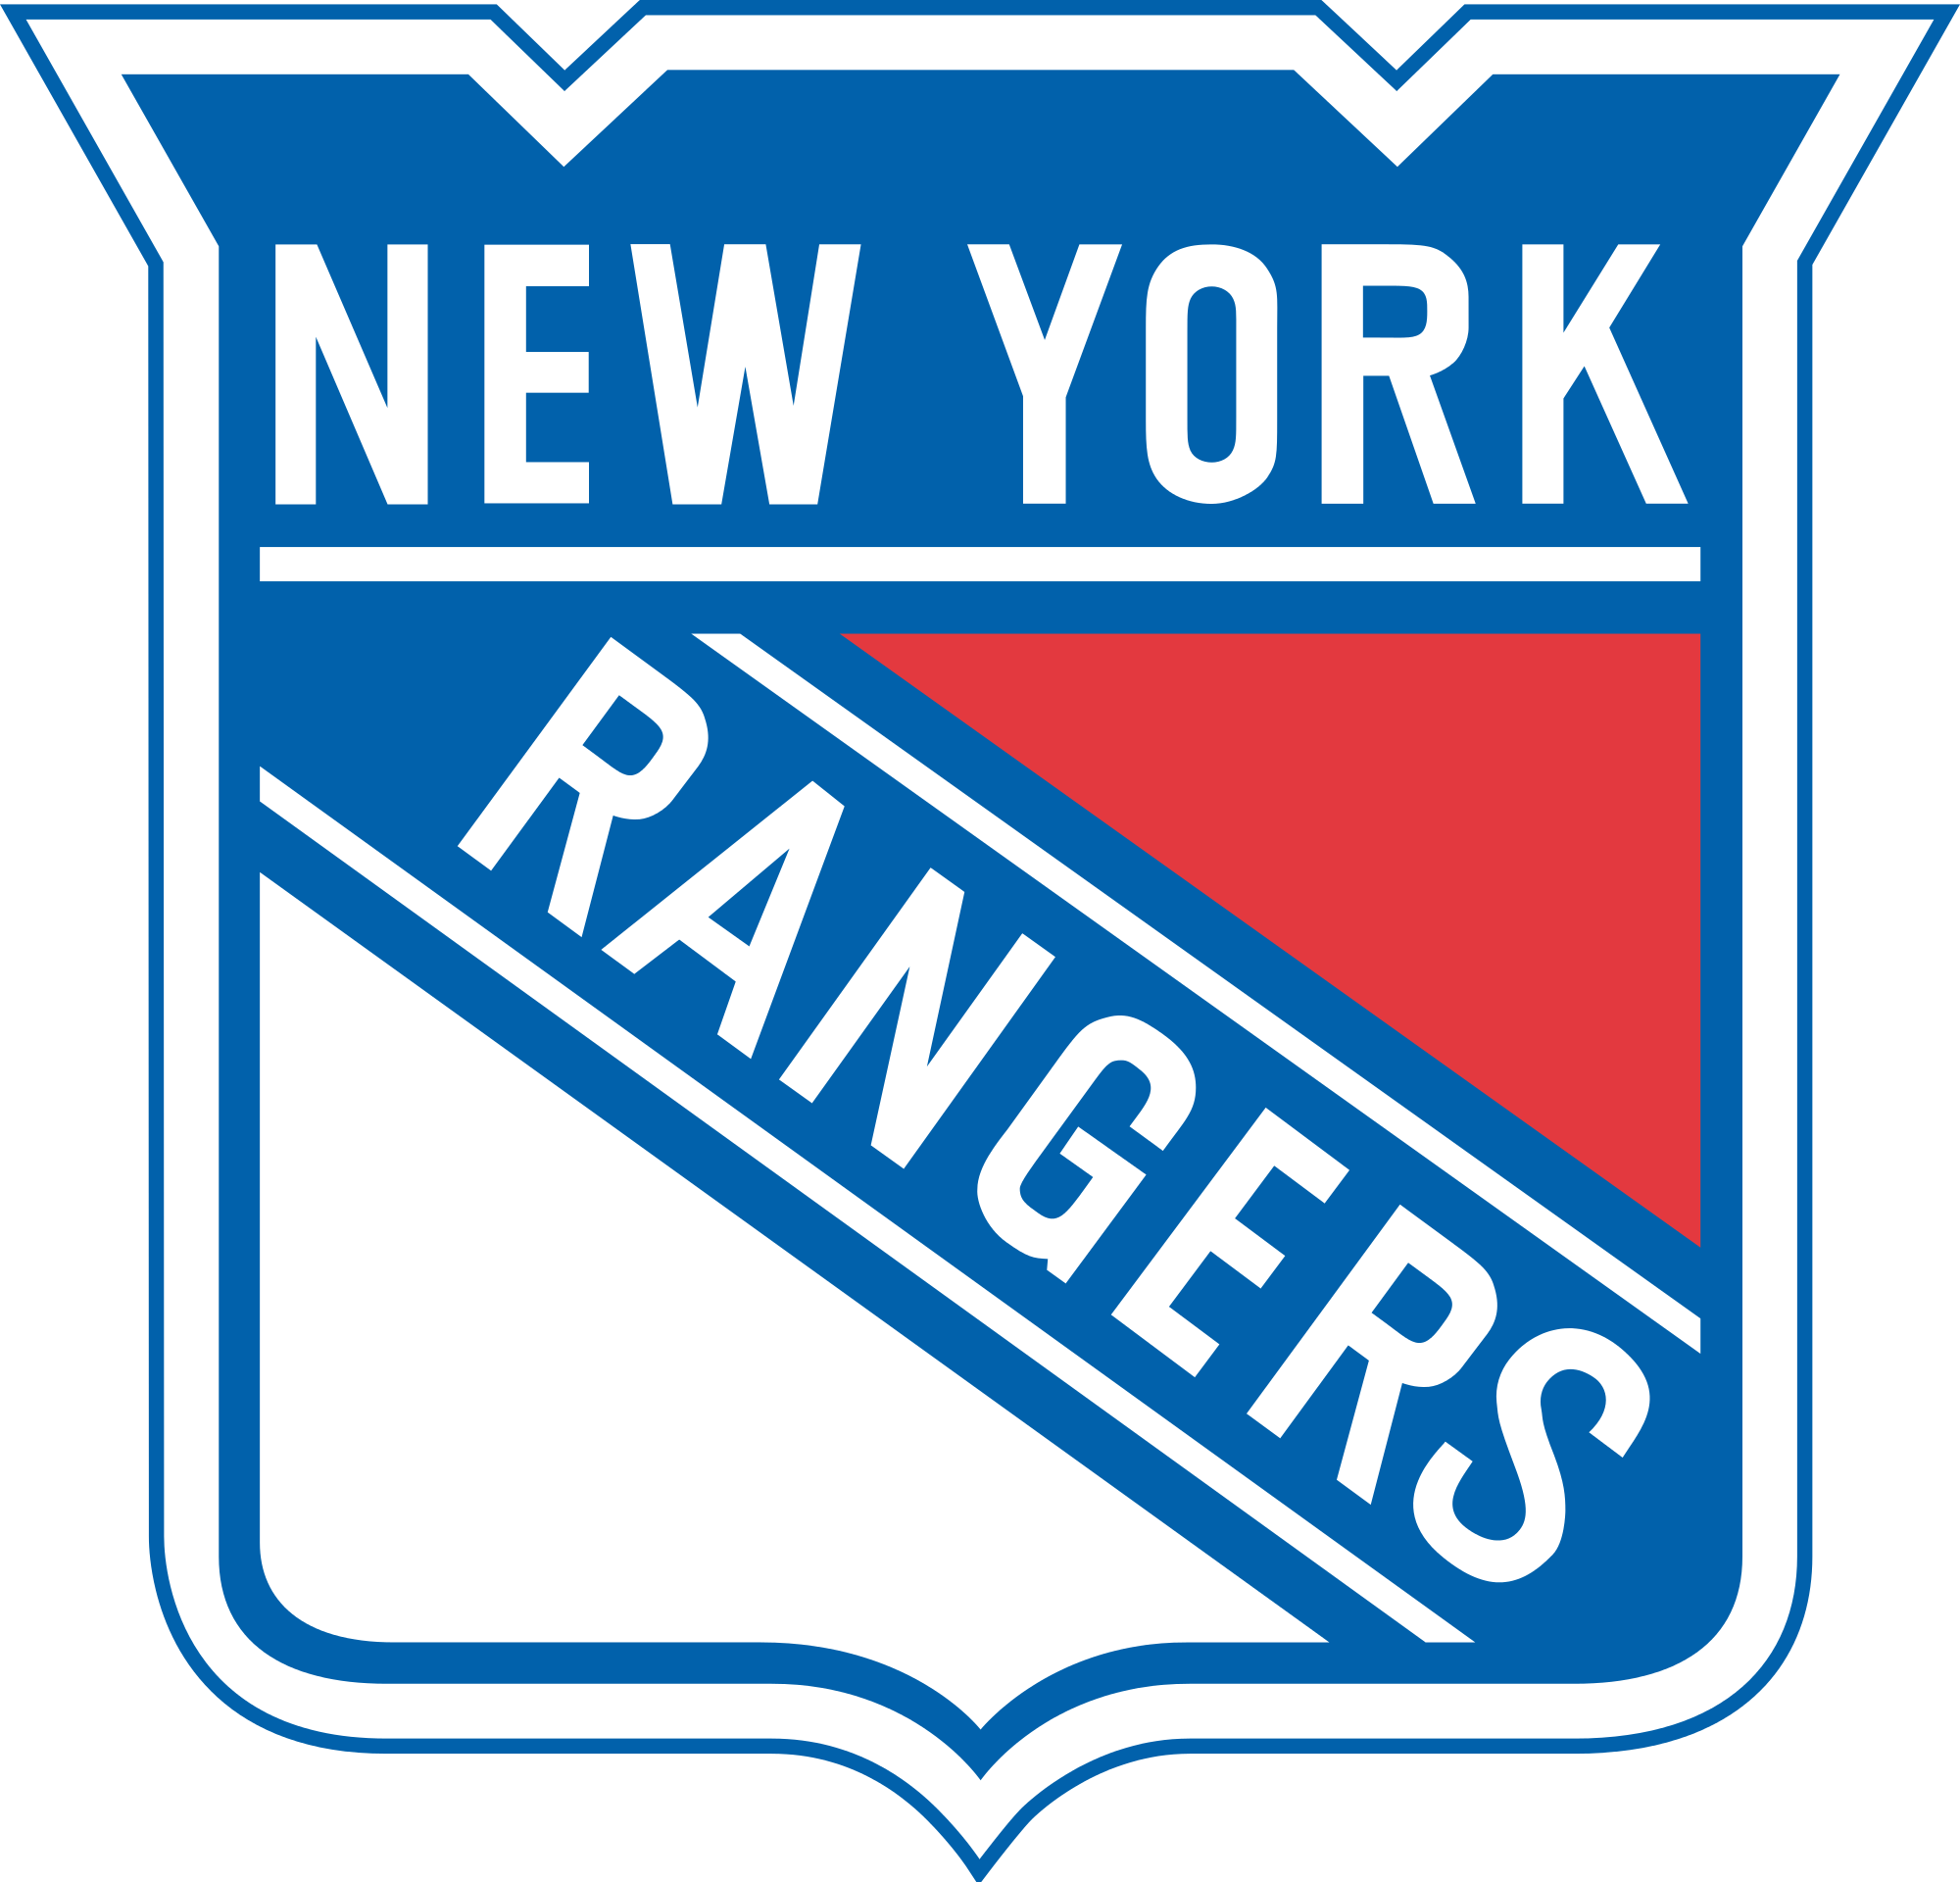 NYR.png